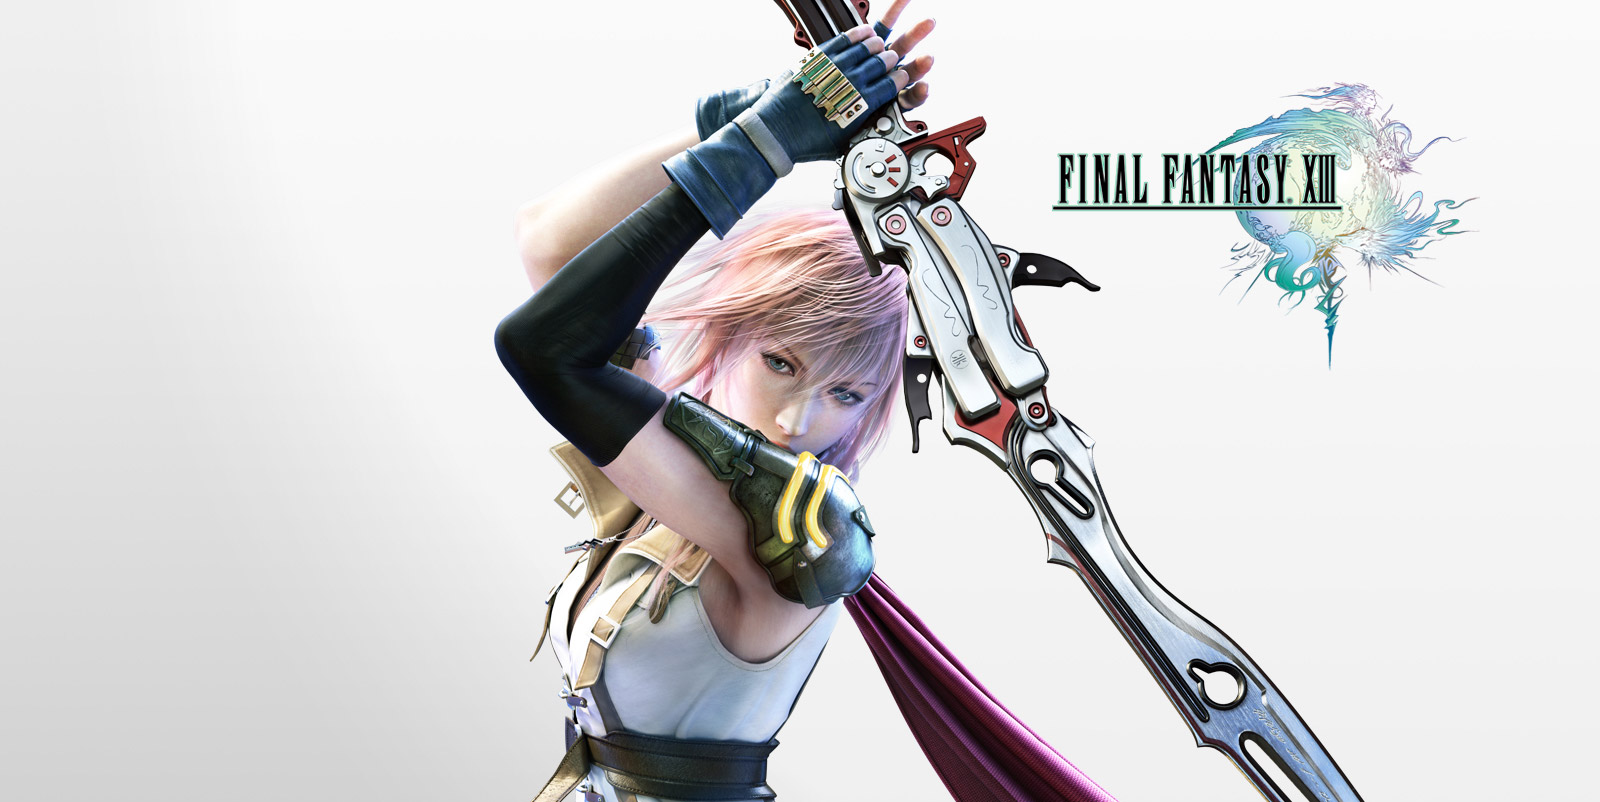 Lightning is the main protagonist of Final Fantasy XIII, and a pivotal character in the whole trilogy.